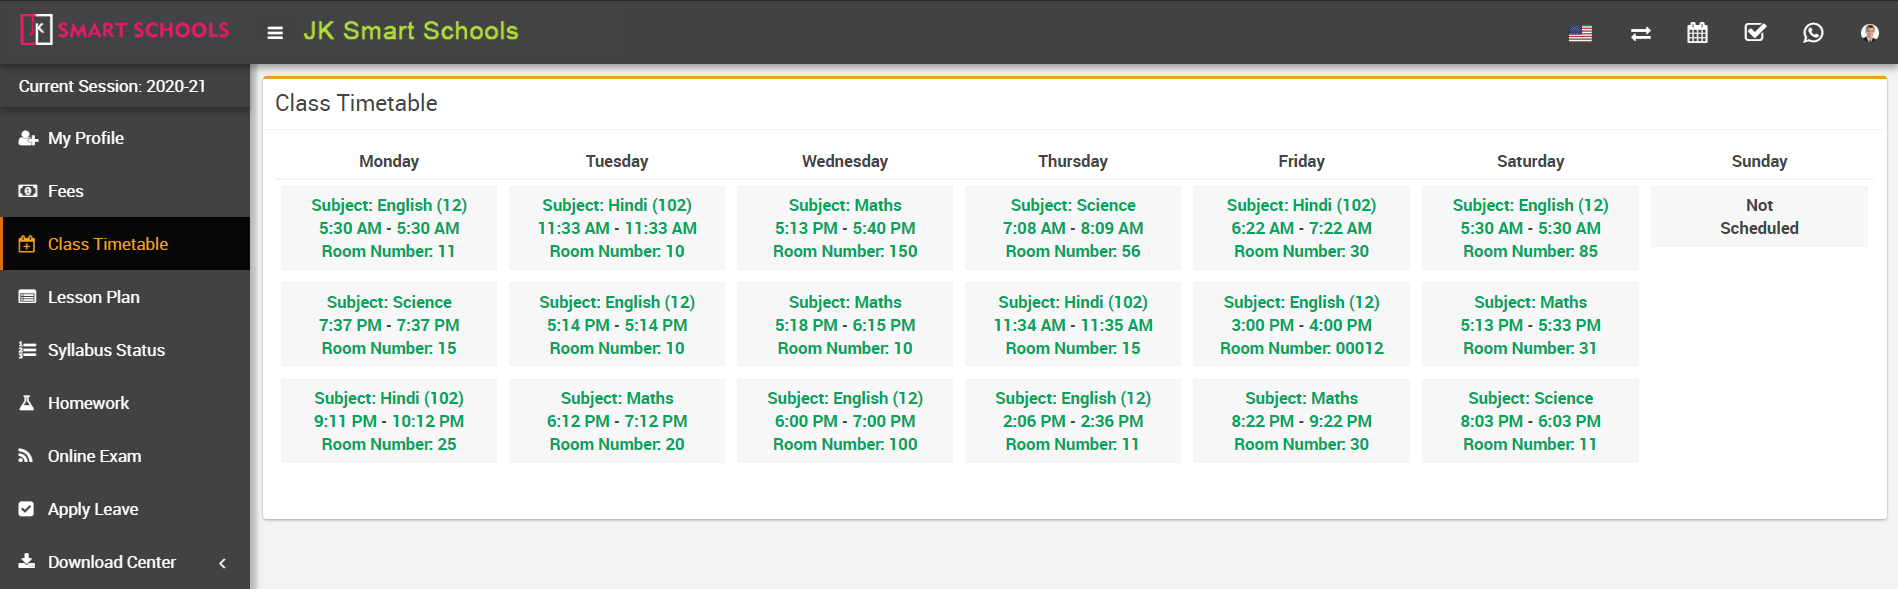 student class time table image